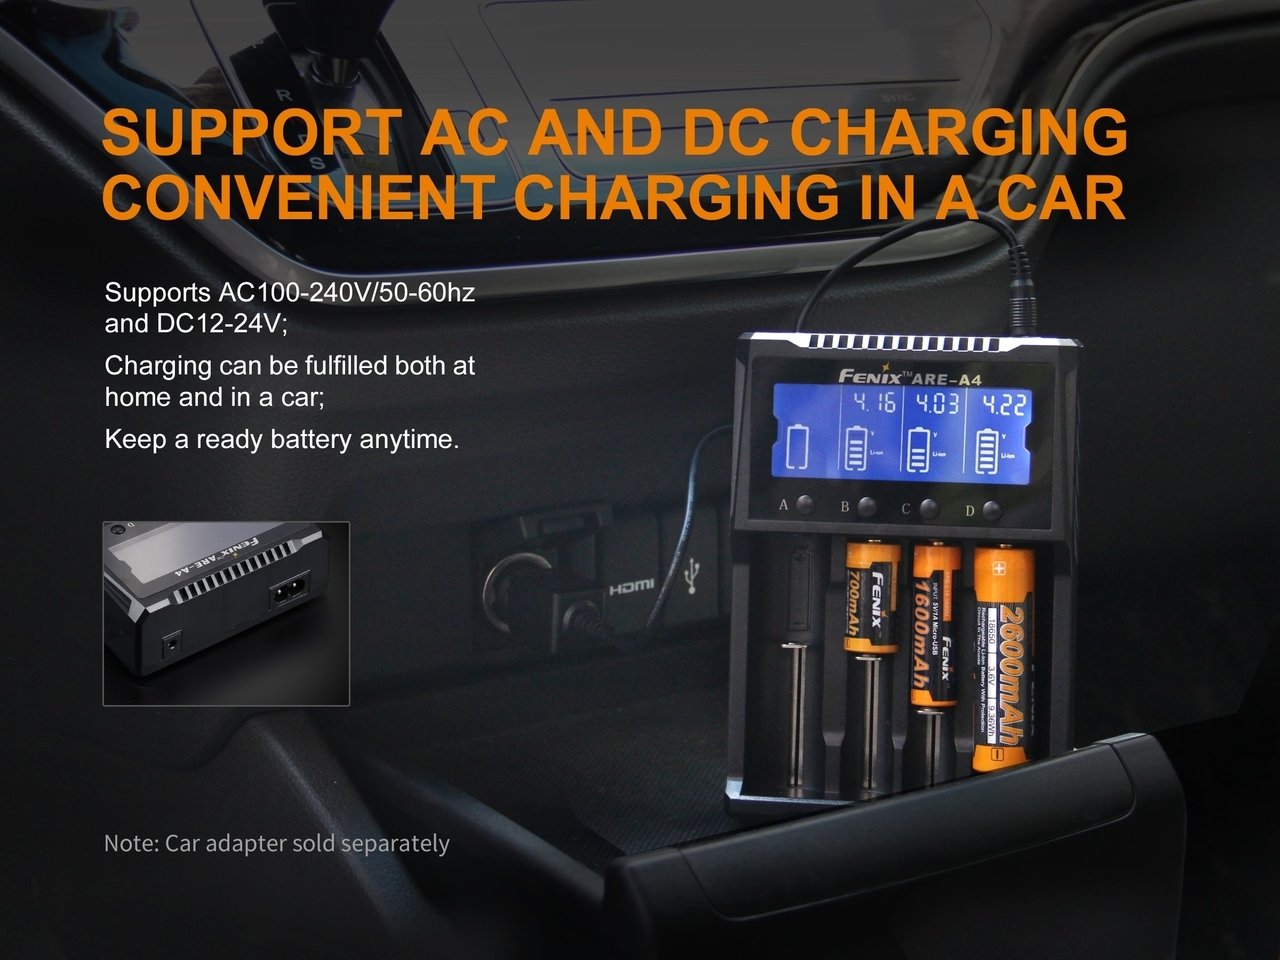 Supports charging in a car